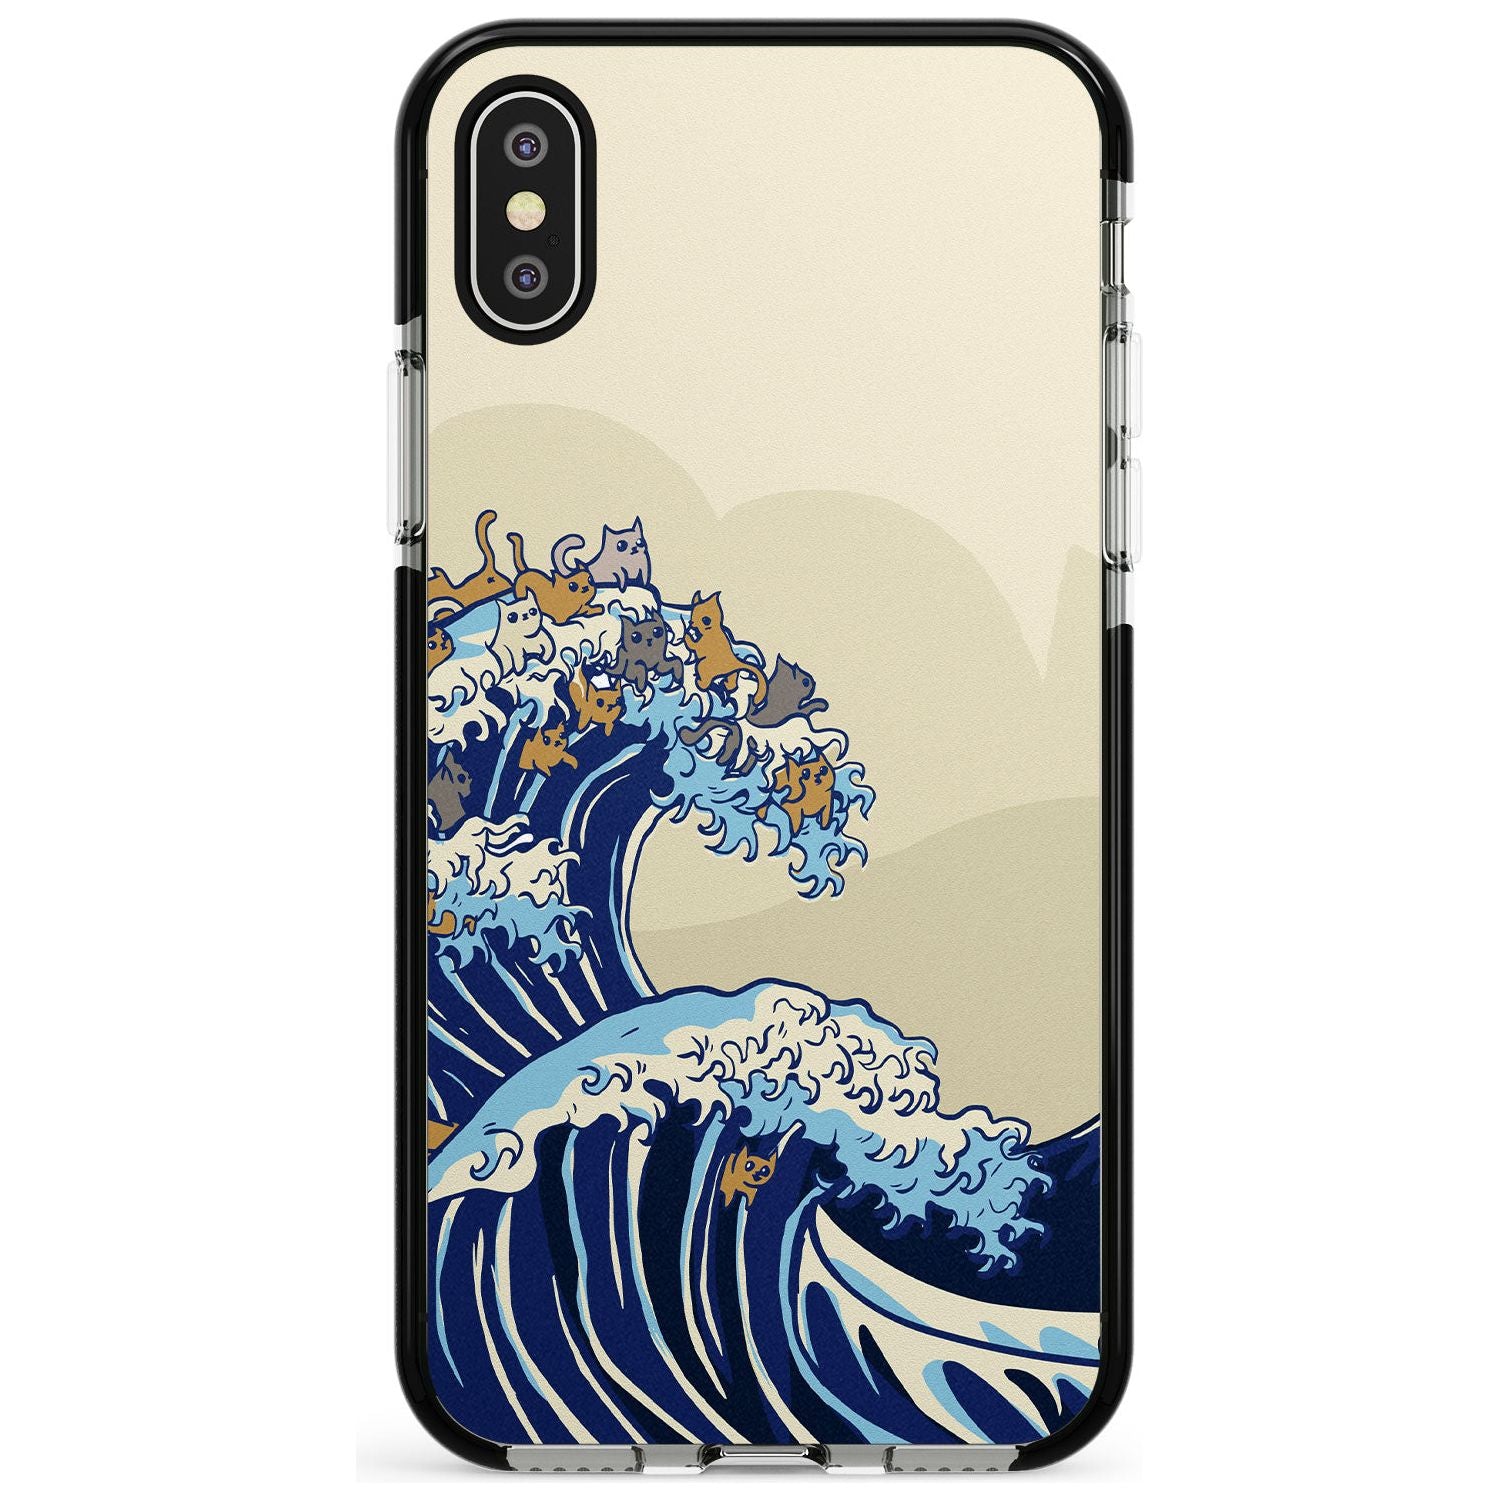 The Great Cat Wave Black Impact Phone Case for iPhone X XS Max XR